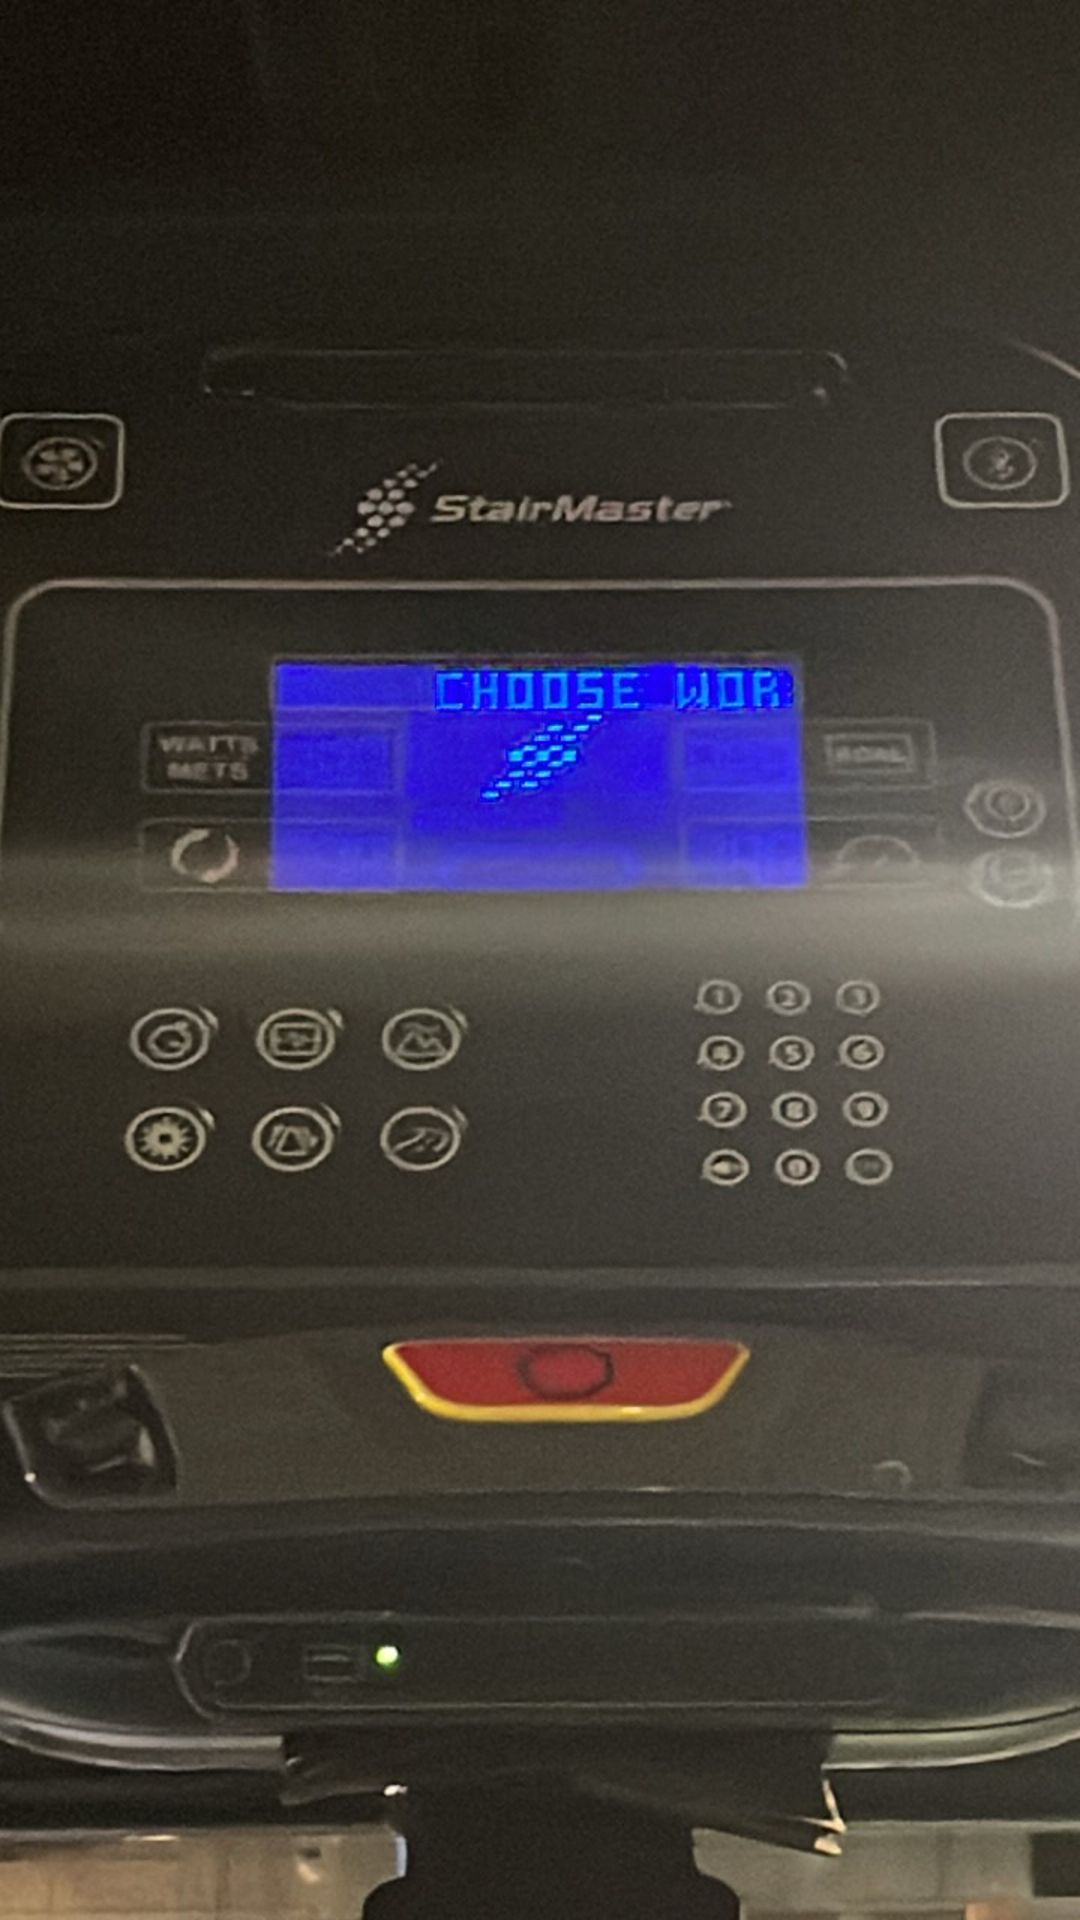 Stairmaster - Image 6 of 8